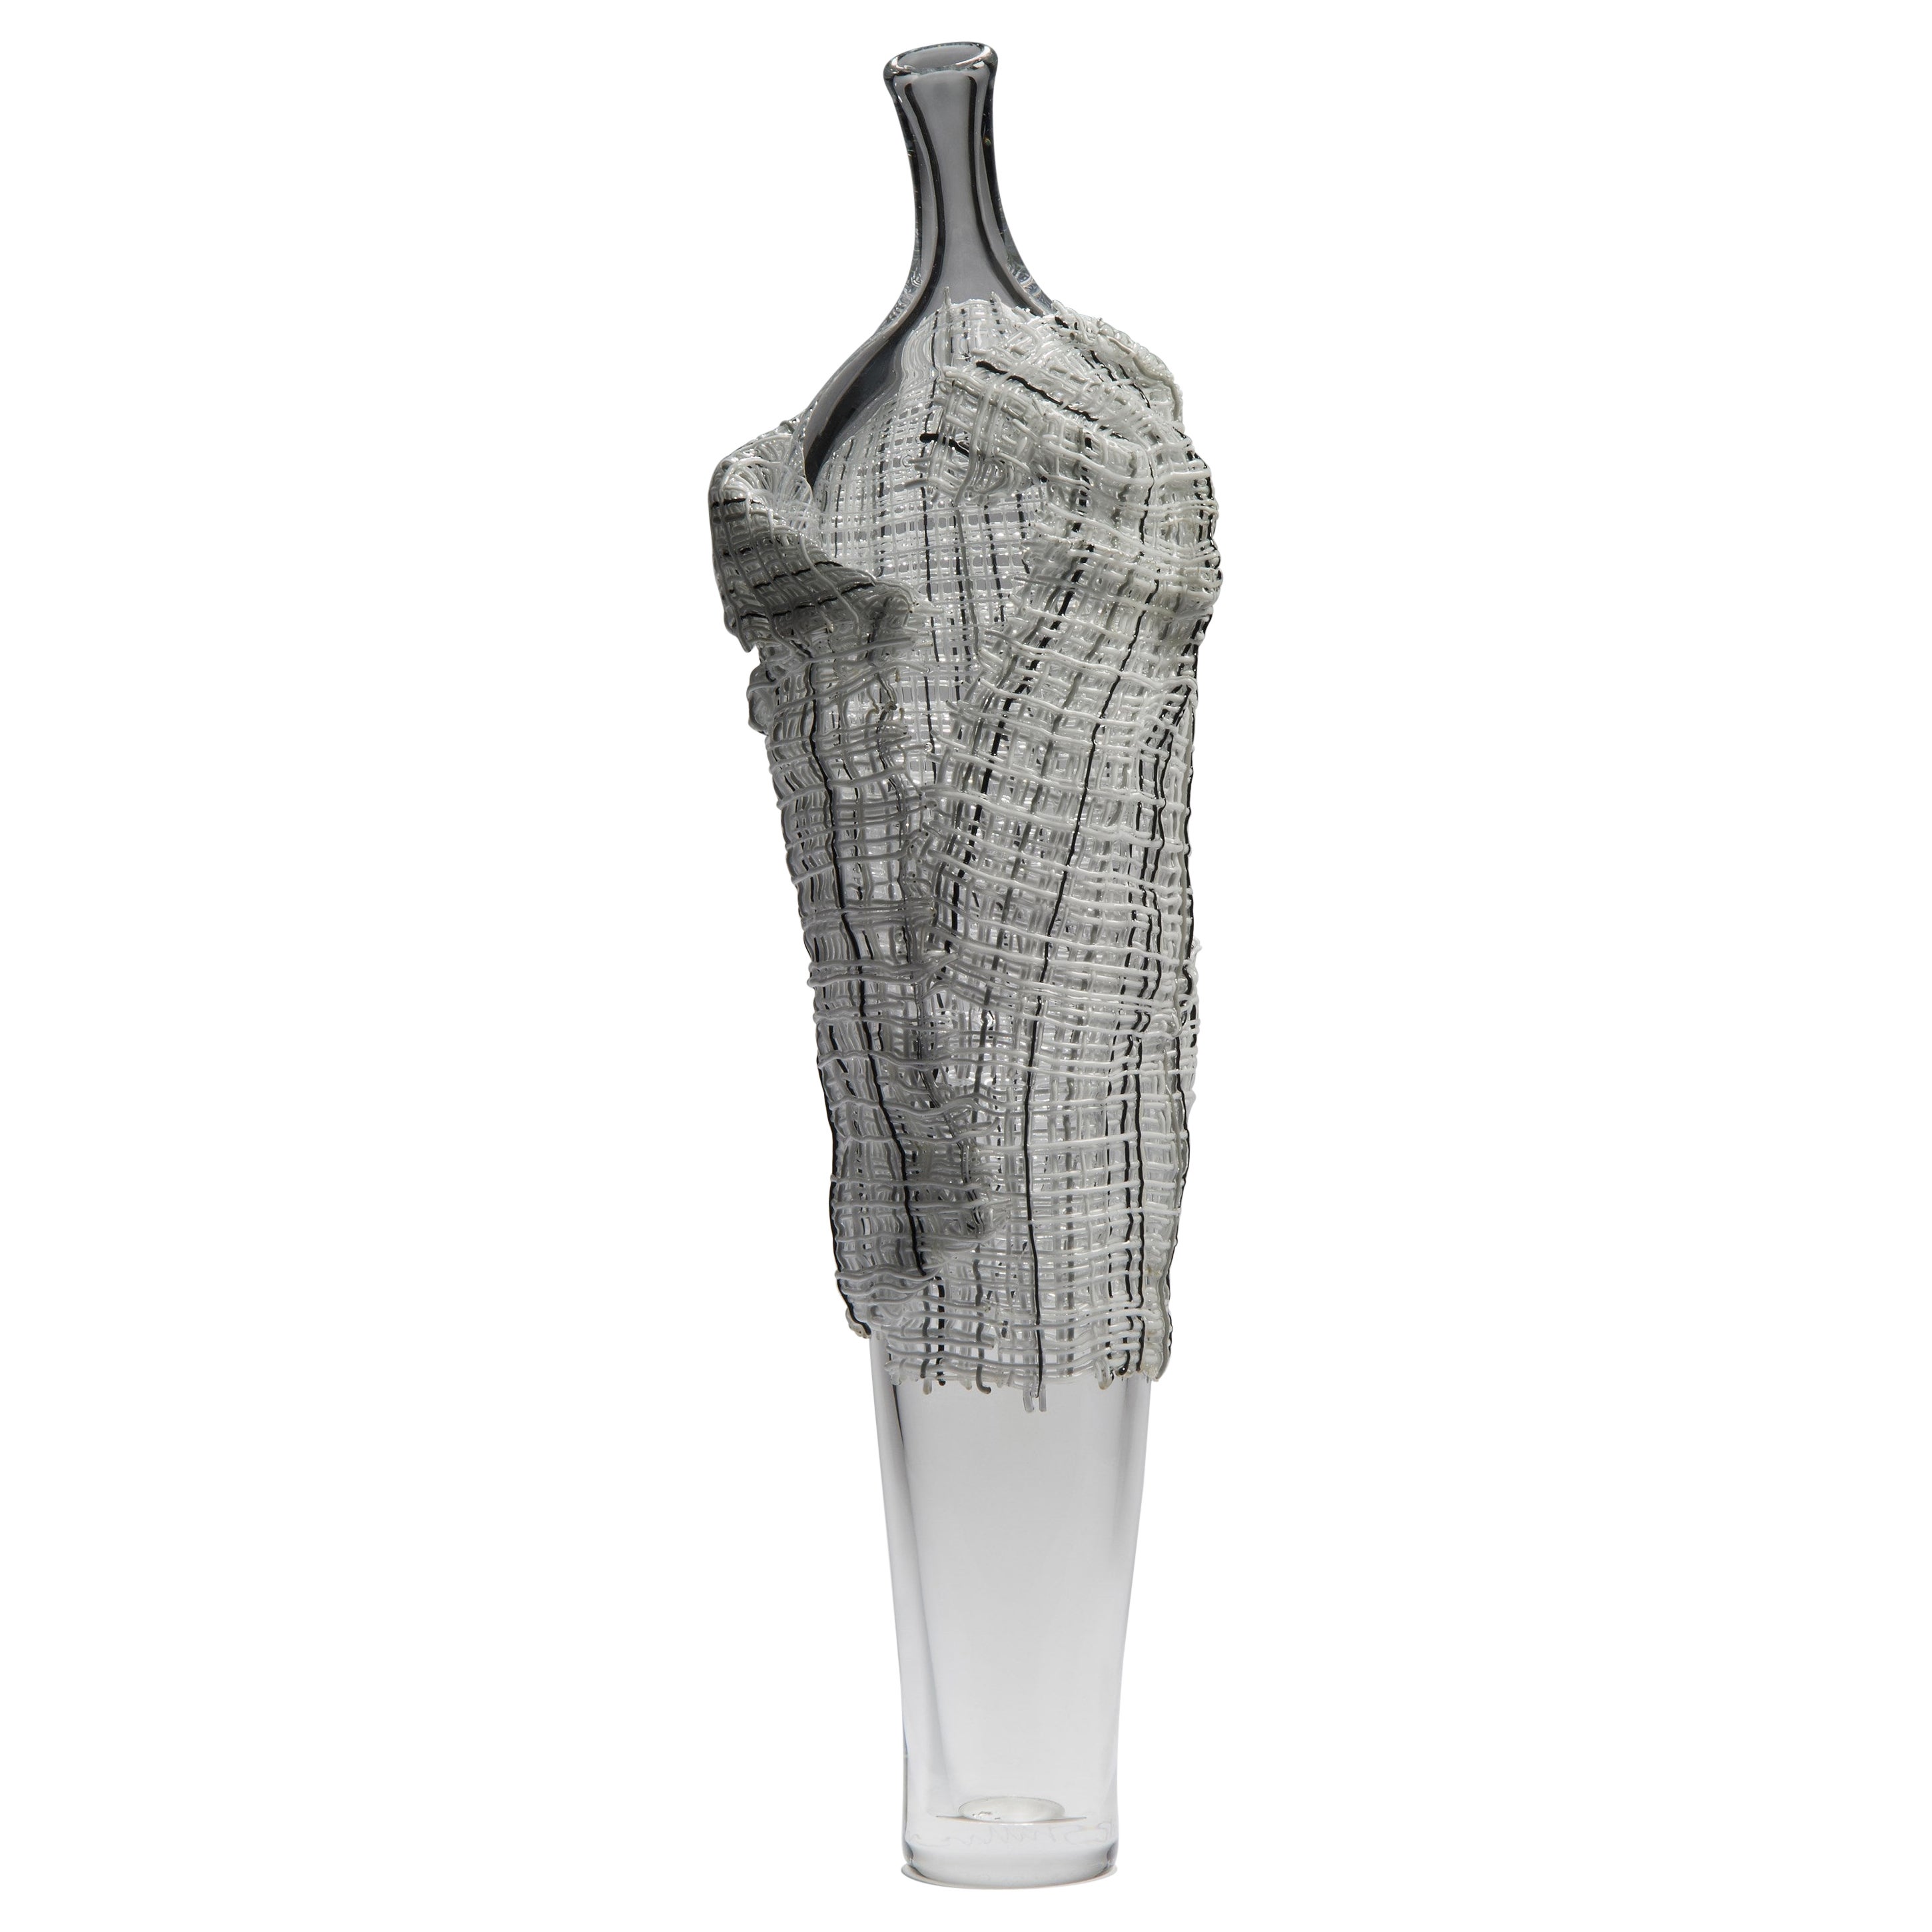  Hera, a clear, grey & black figurative glass sculpture by Cathryn Shilling For Sale